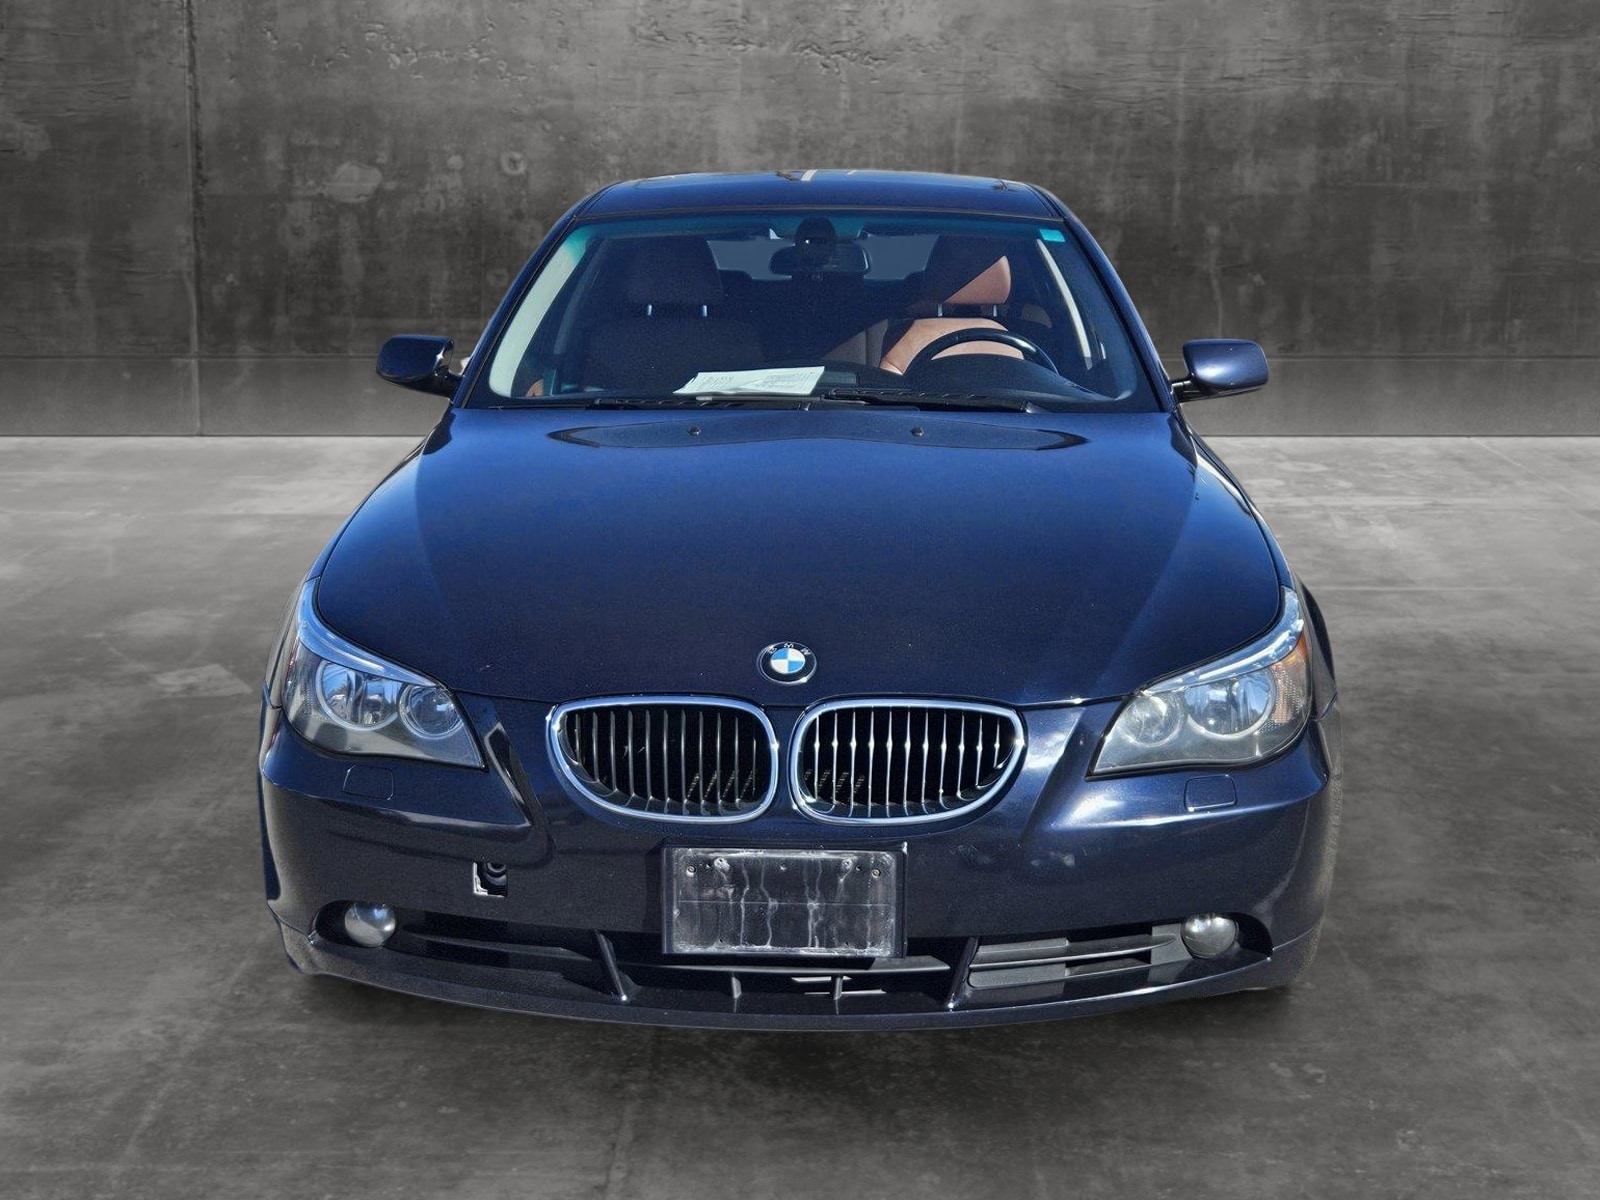 Used 2007 BMW 5 Series 525i with VIN WBANE53537CK92129 for sale in Las Vegas, NV